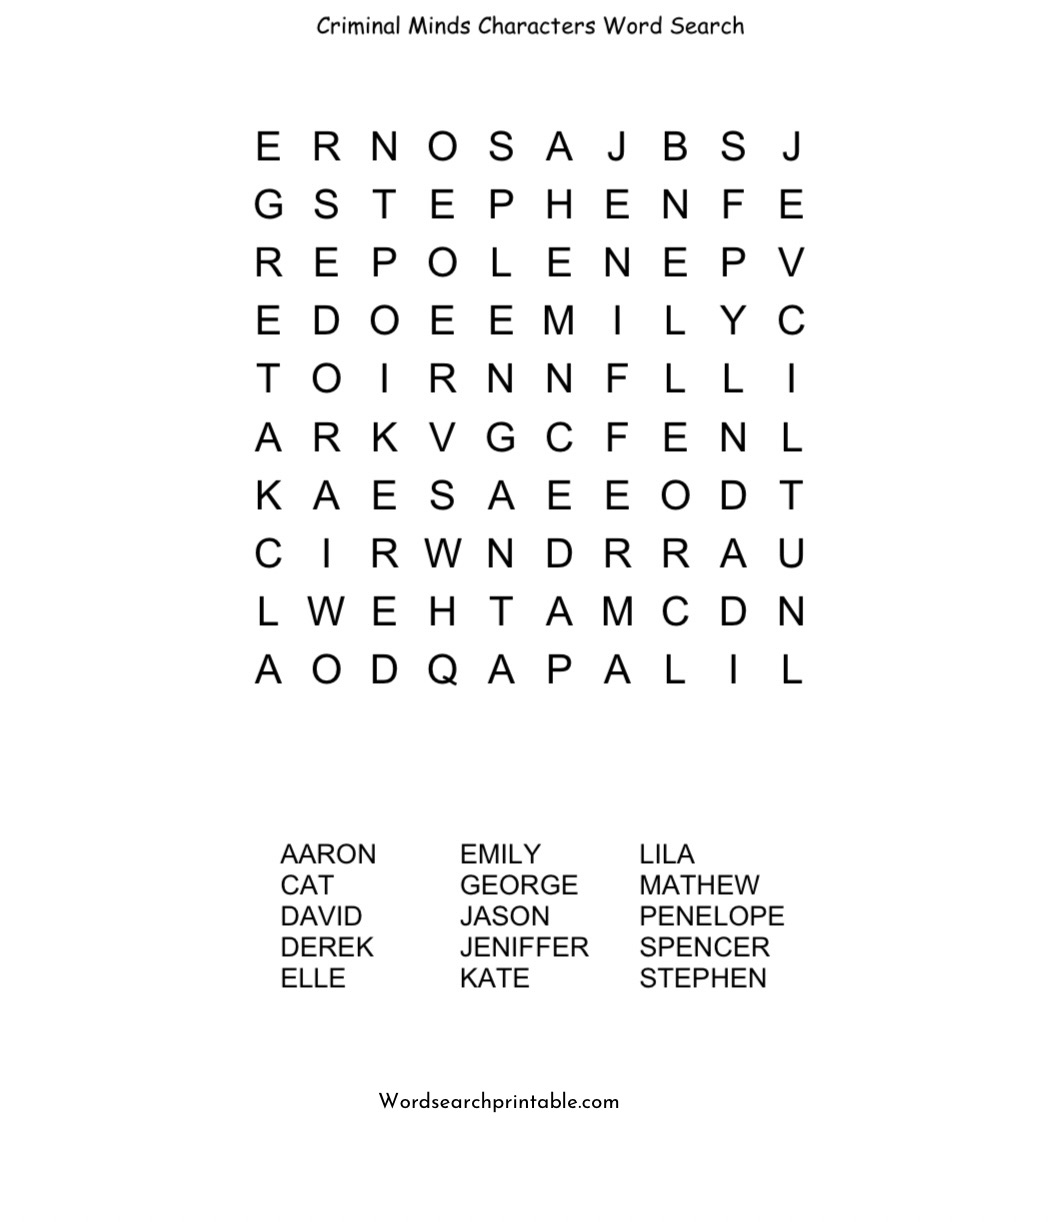 Criminal Minds Characters Word Search